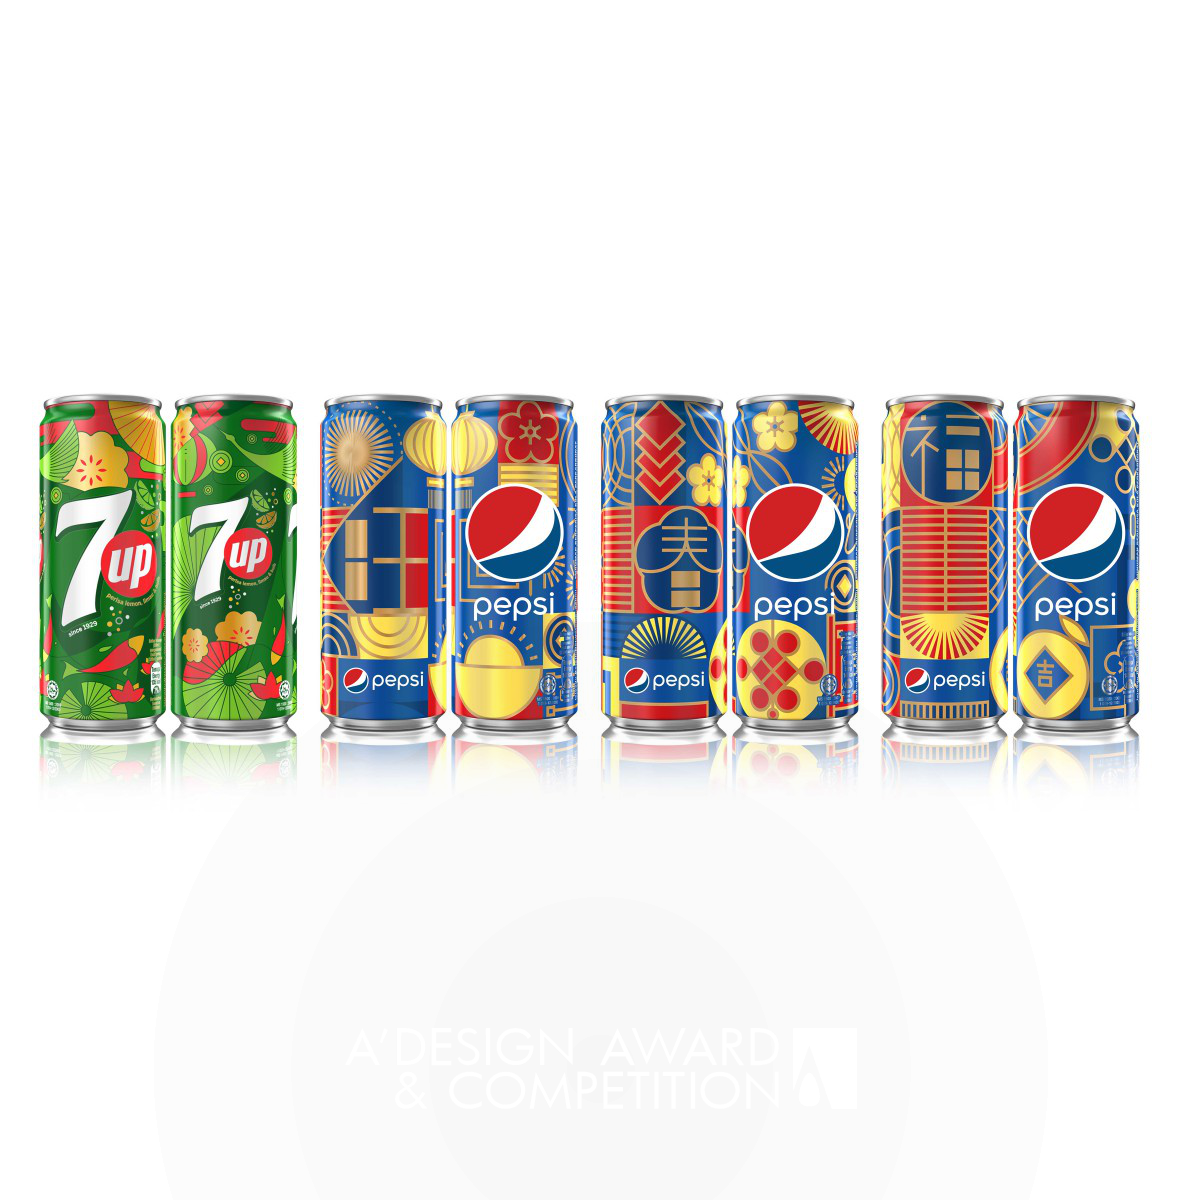 Pepsi x 7Up Chinese New Year LTO Cans Brand Packaging by PepsiCo Design & Innovation Golden Food, Beverage and Culinary Arts Design Award Winner 2018 